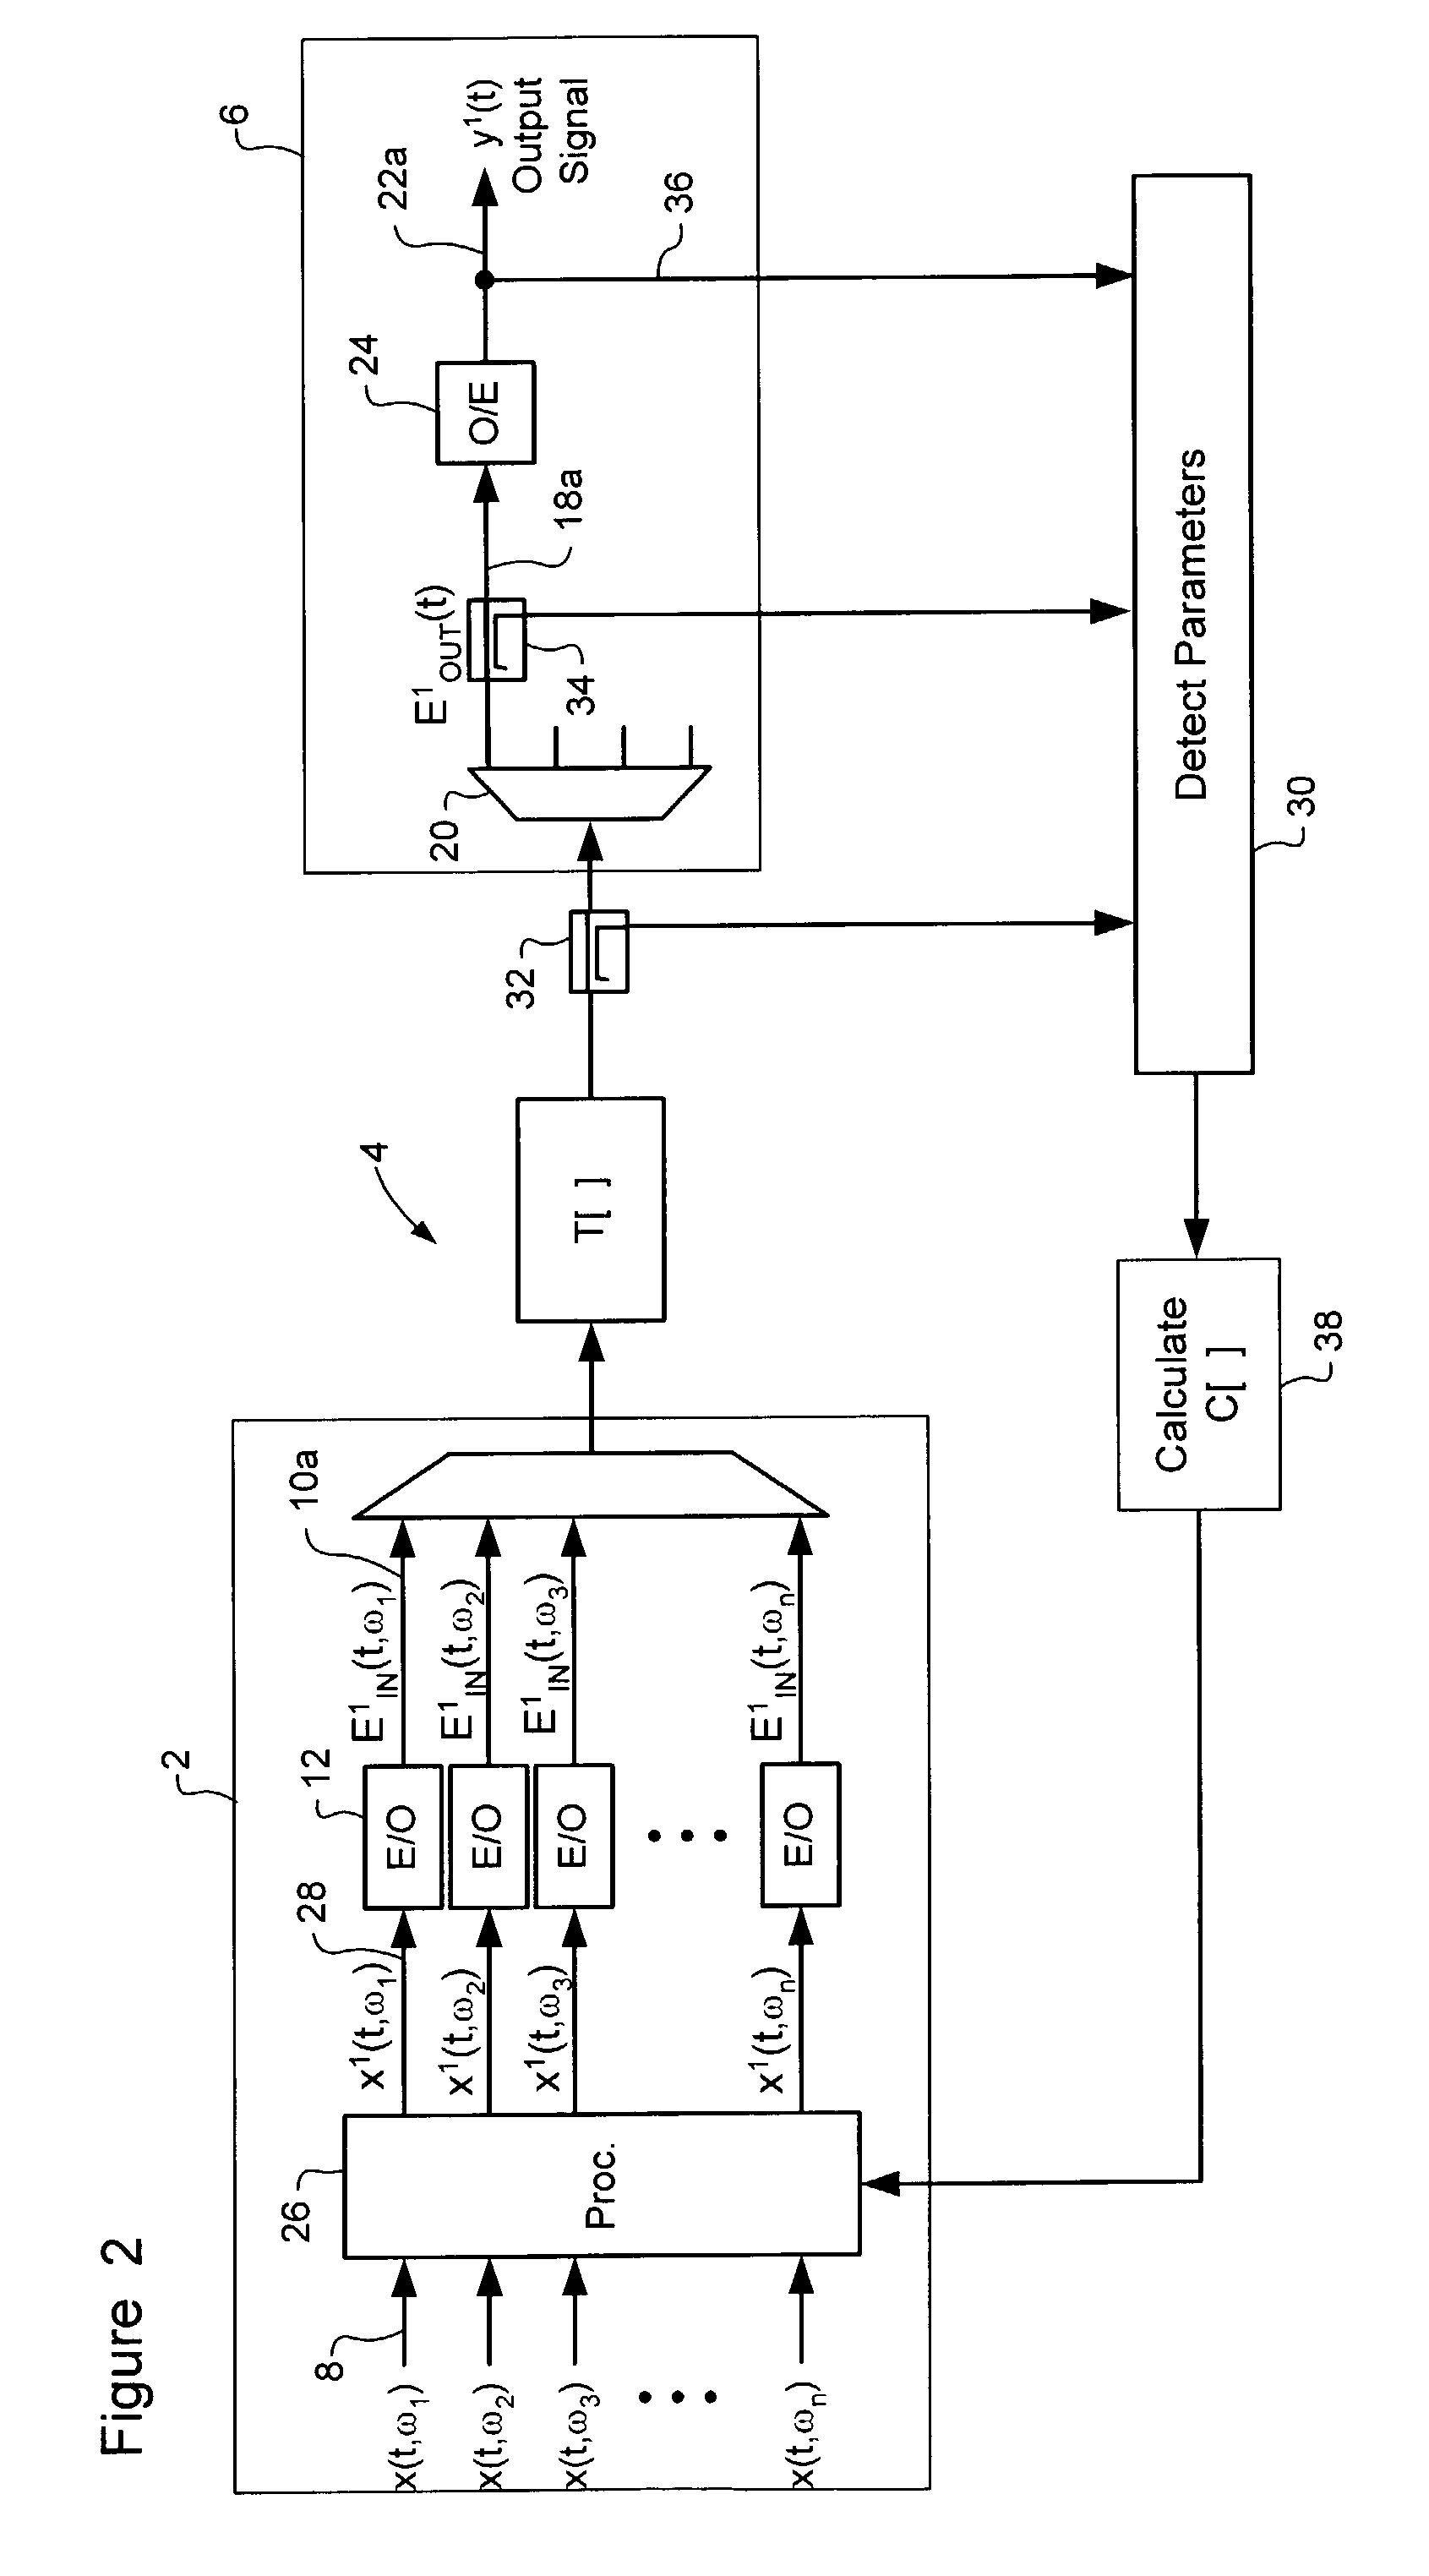 Electrical domain compensation of non-linear effects in an optical communications system